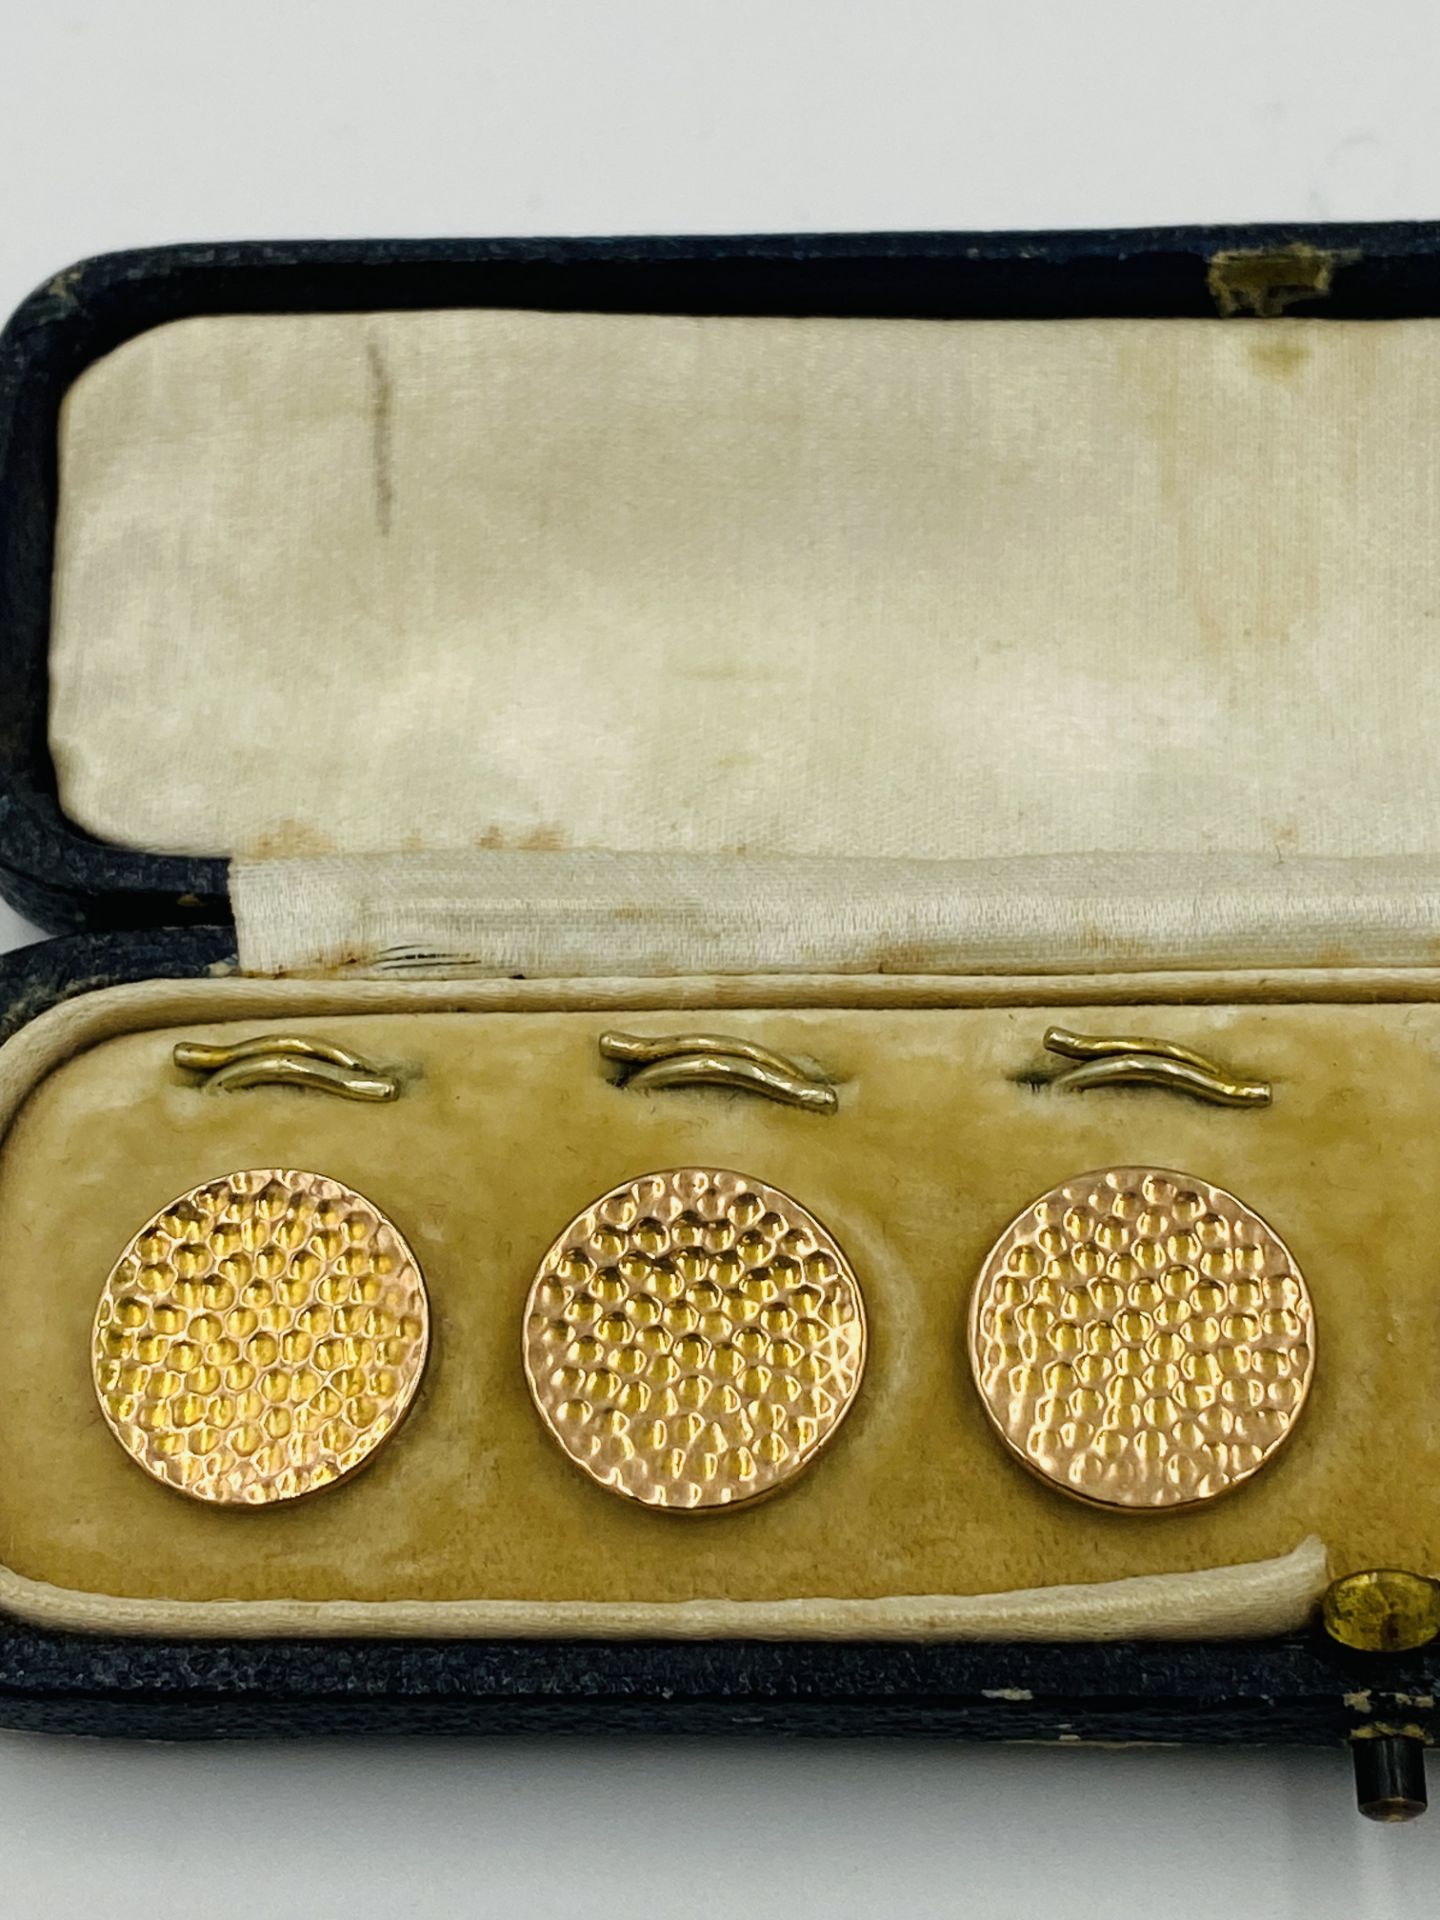 Boxed set of six 9ct gold buttons - Image 3 of 4